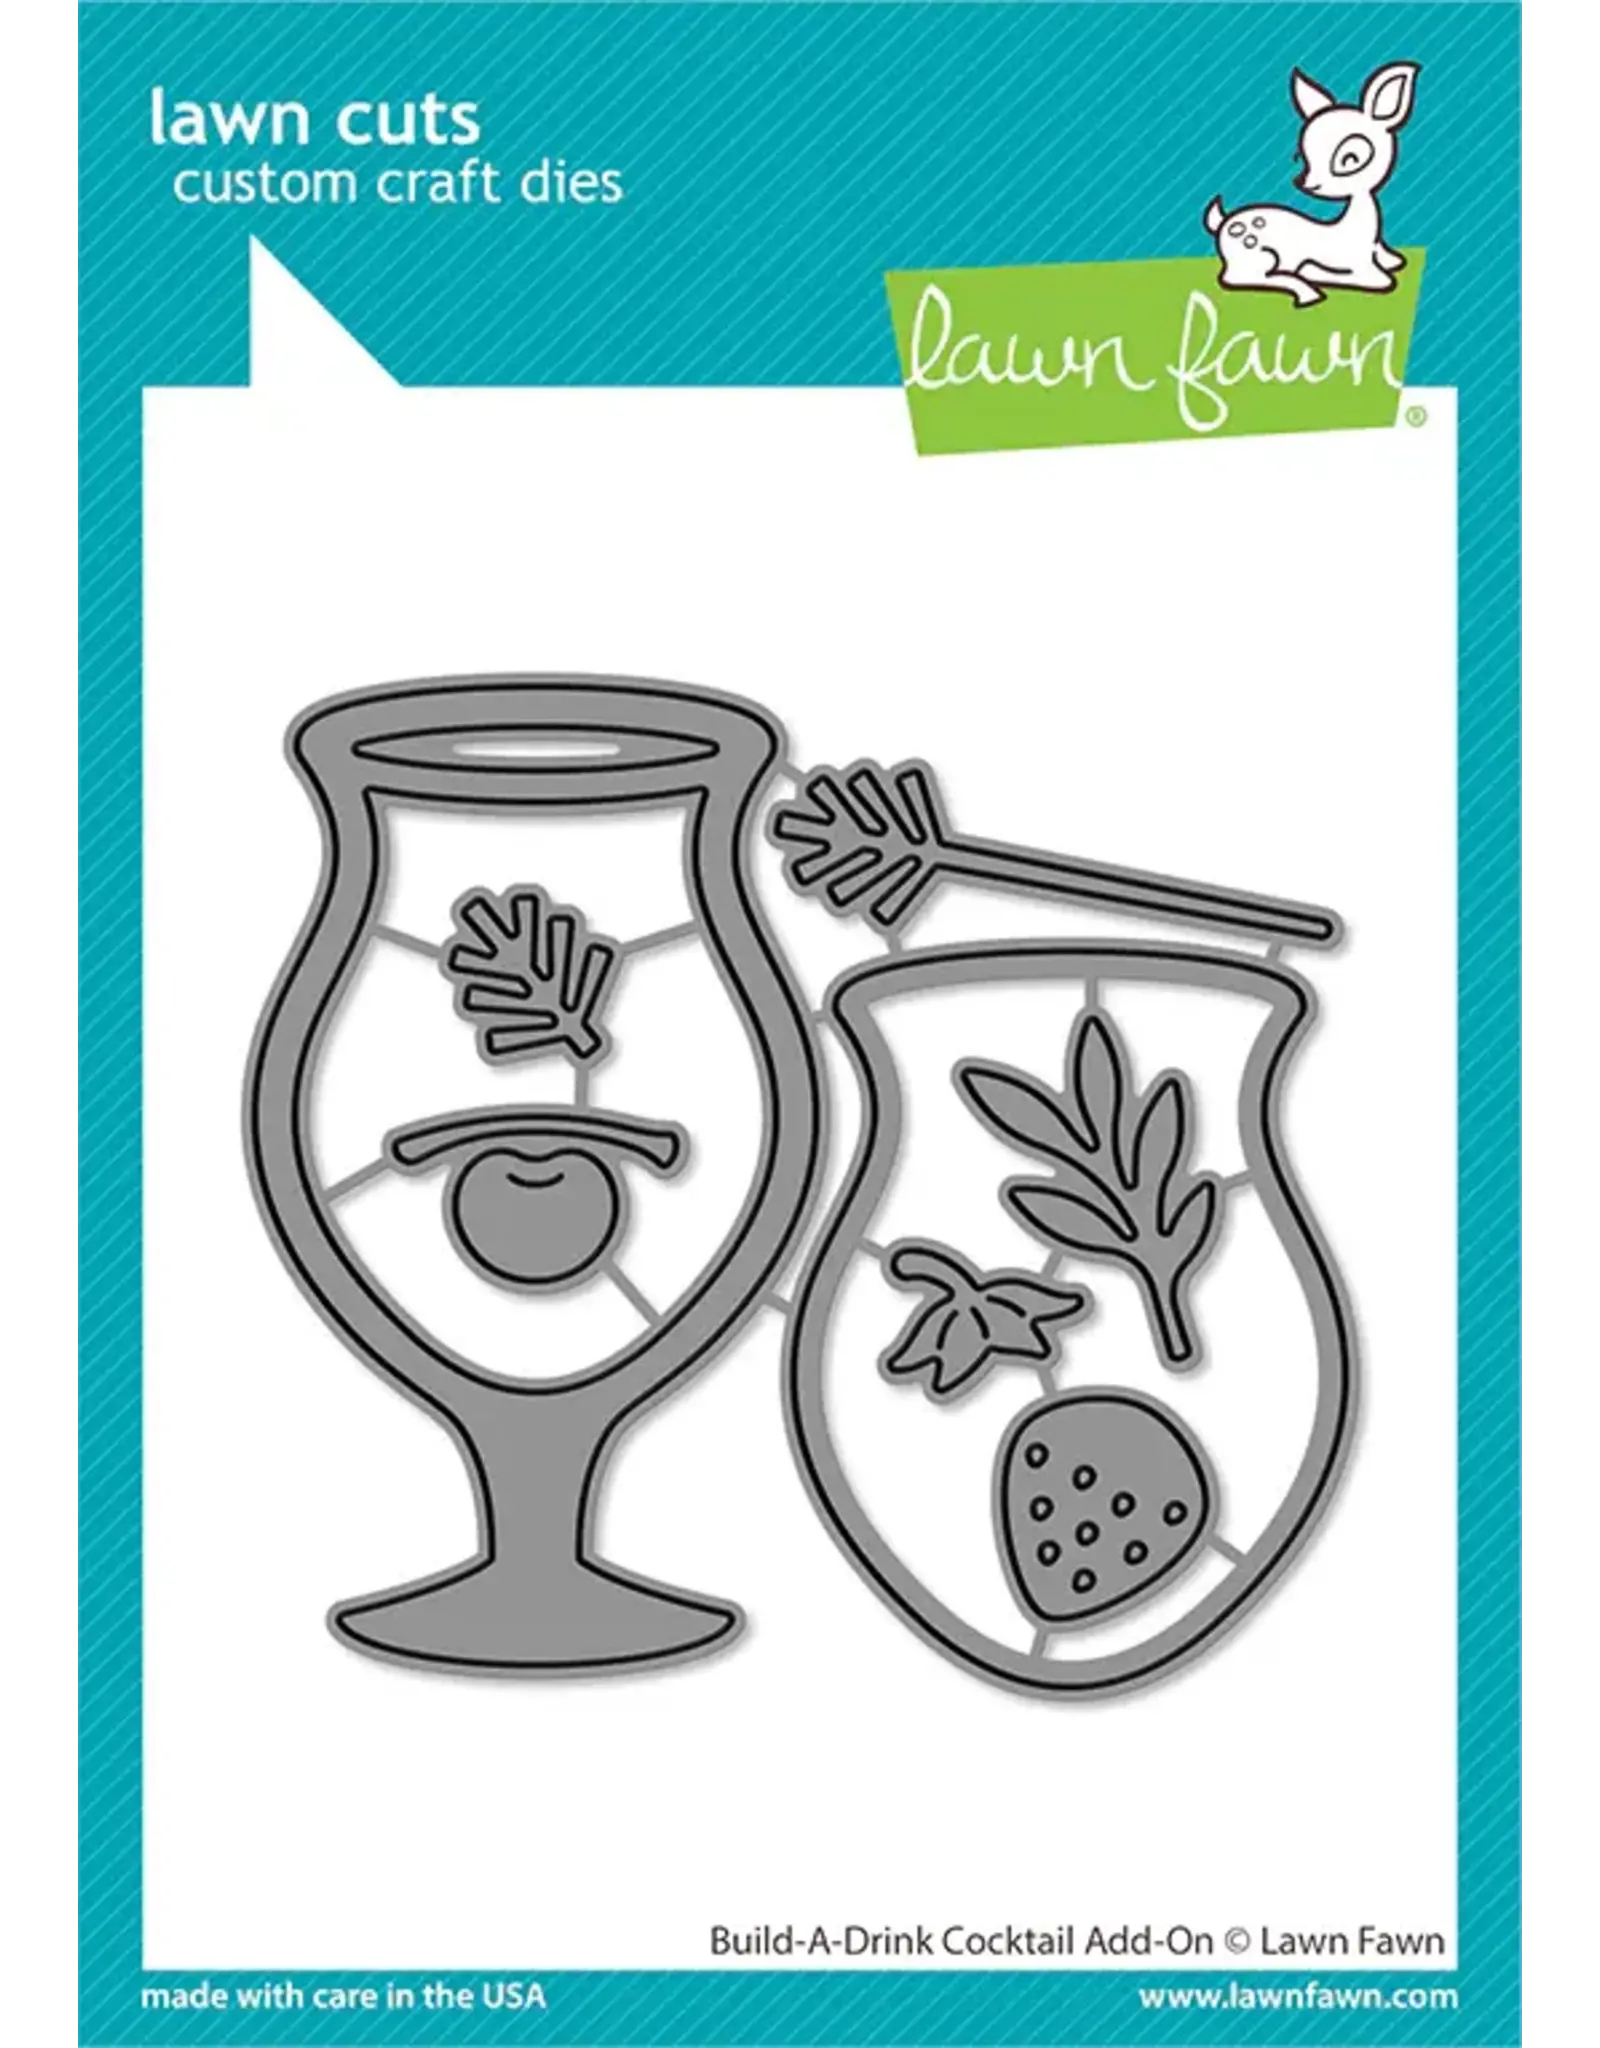 LAWN FAWN LAWN FAWN BUILD-A-DRINK COCKTAIL ADD-ON DIE SET